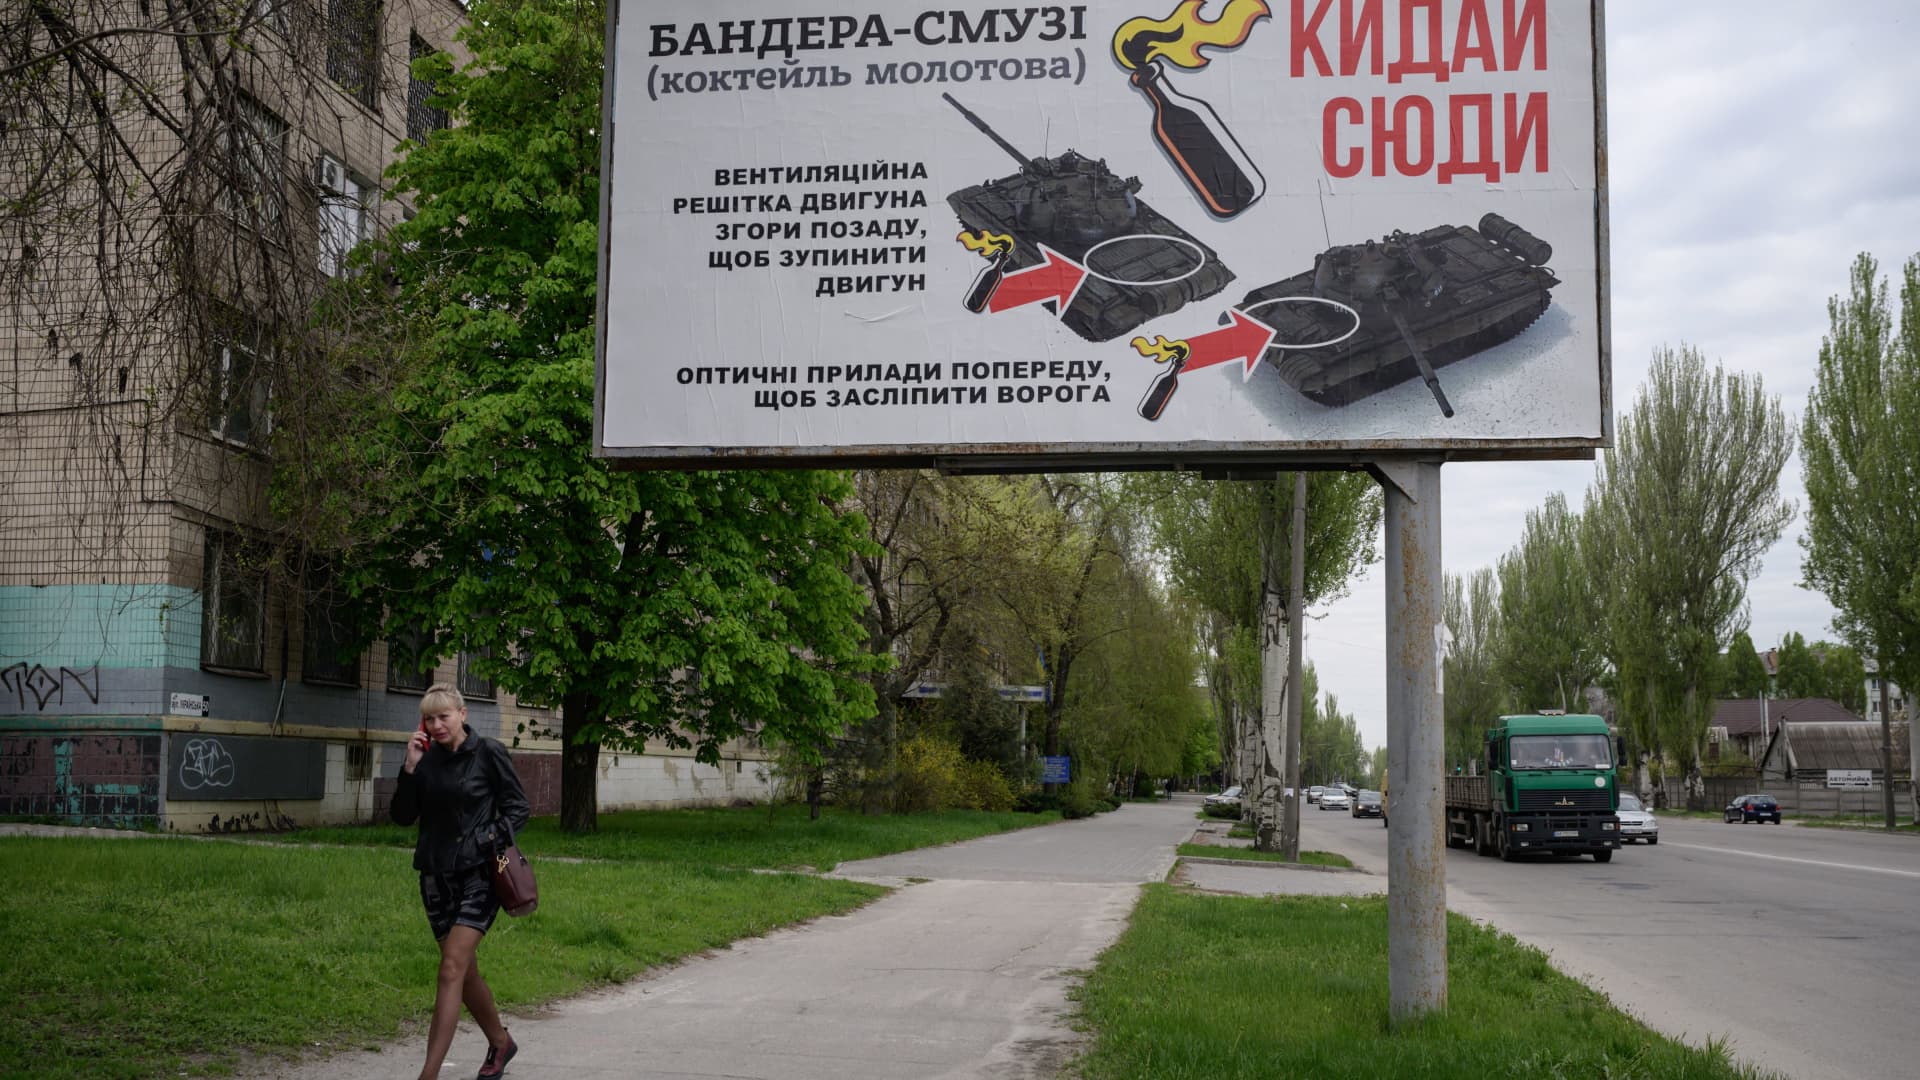 A woman walks past a billboard advising where to target tanks when throwing molotov cocktails, in Zaporizhzhia on April 29, 2022, on the 65th day of the Russian invasion of Ukraine.